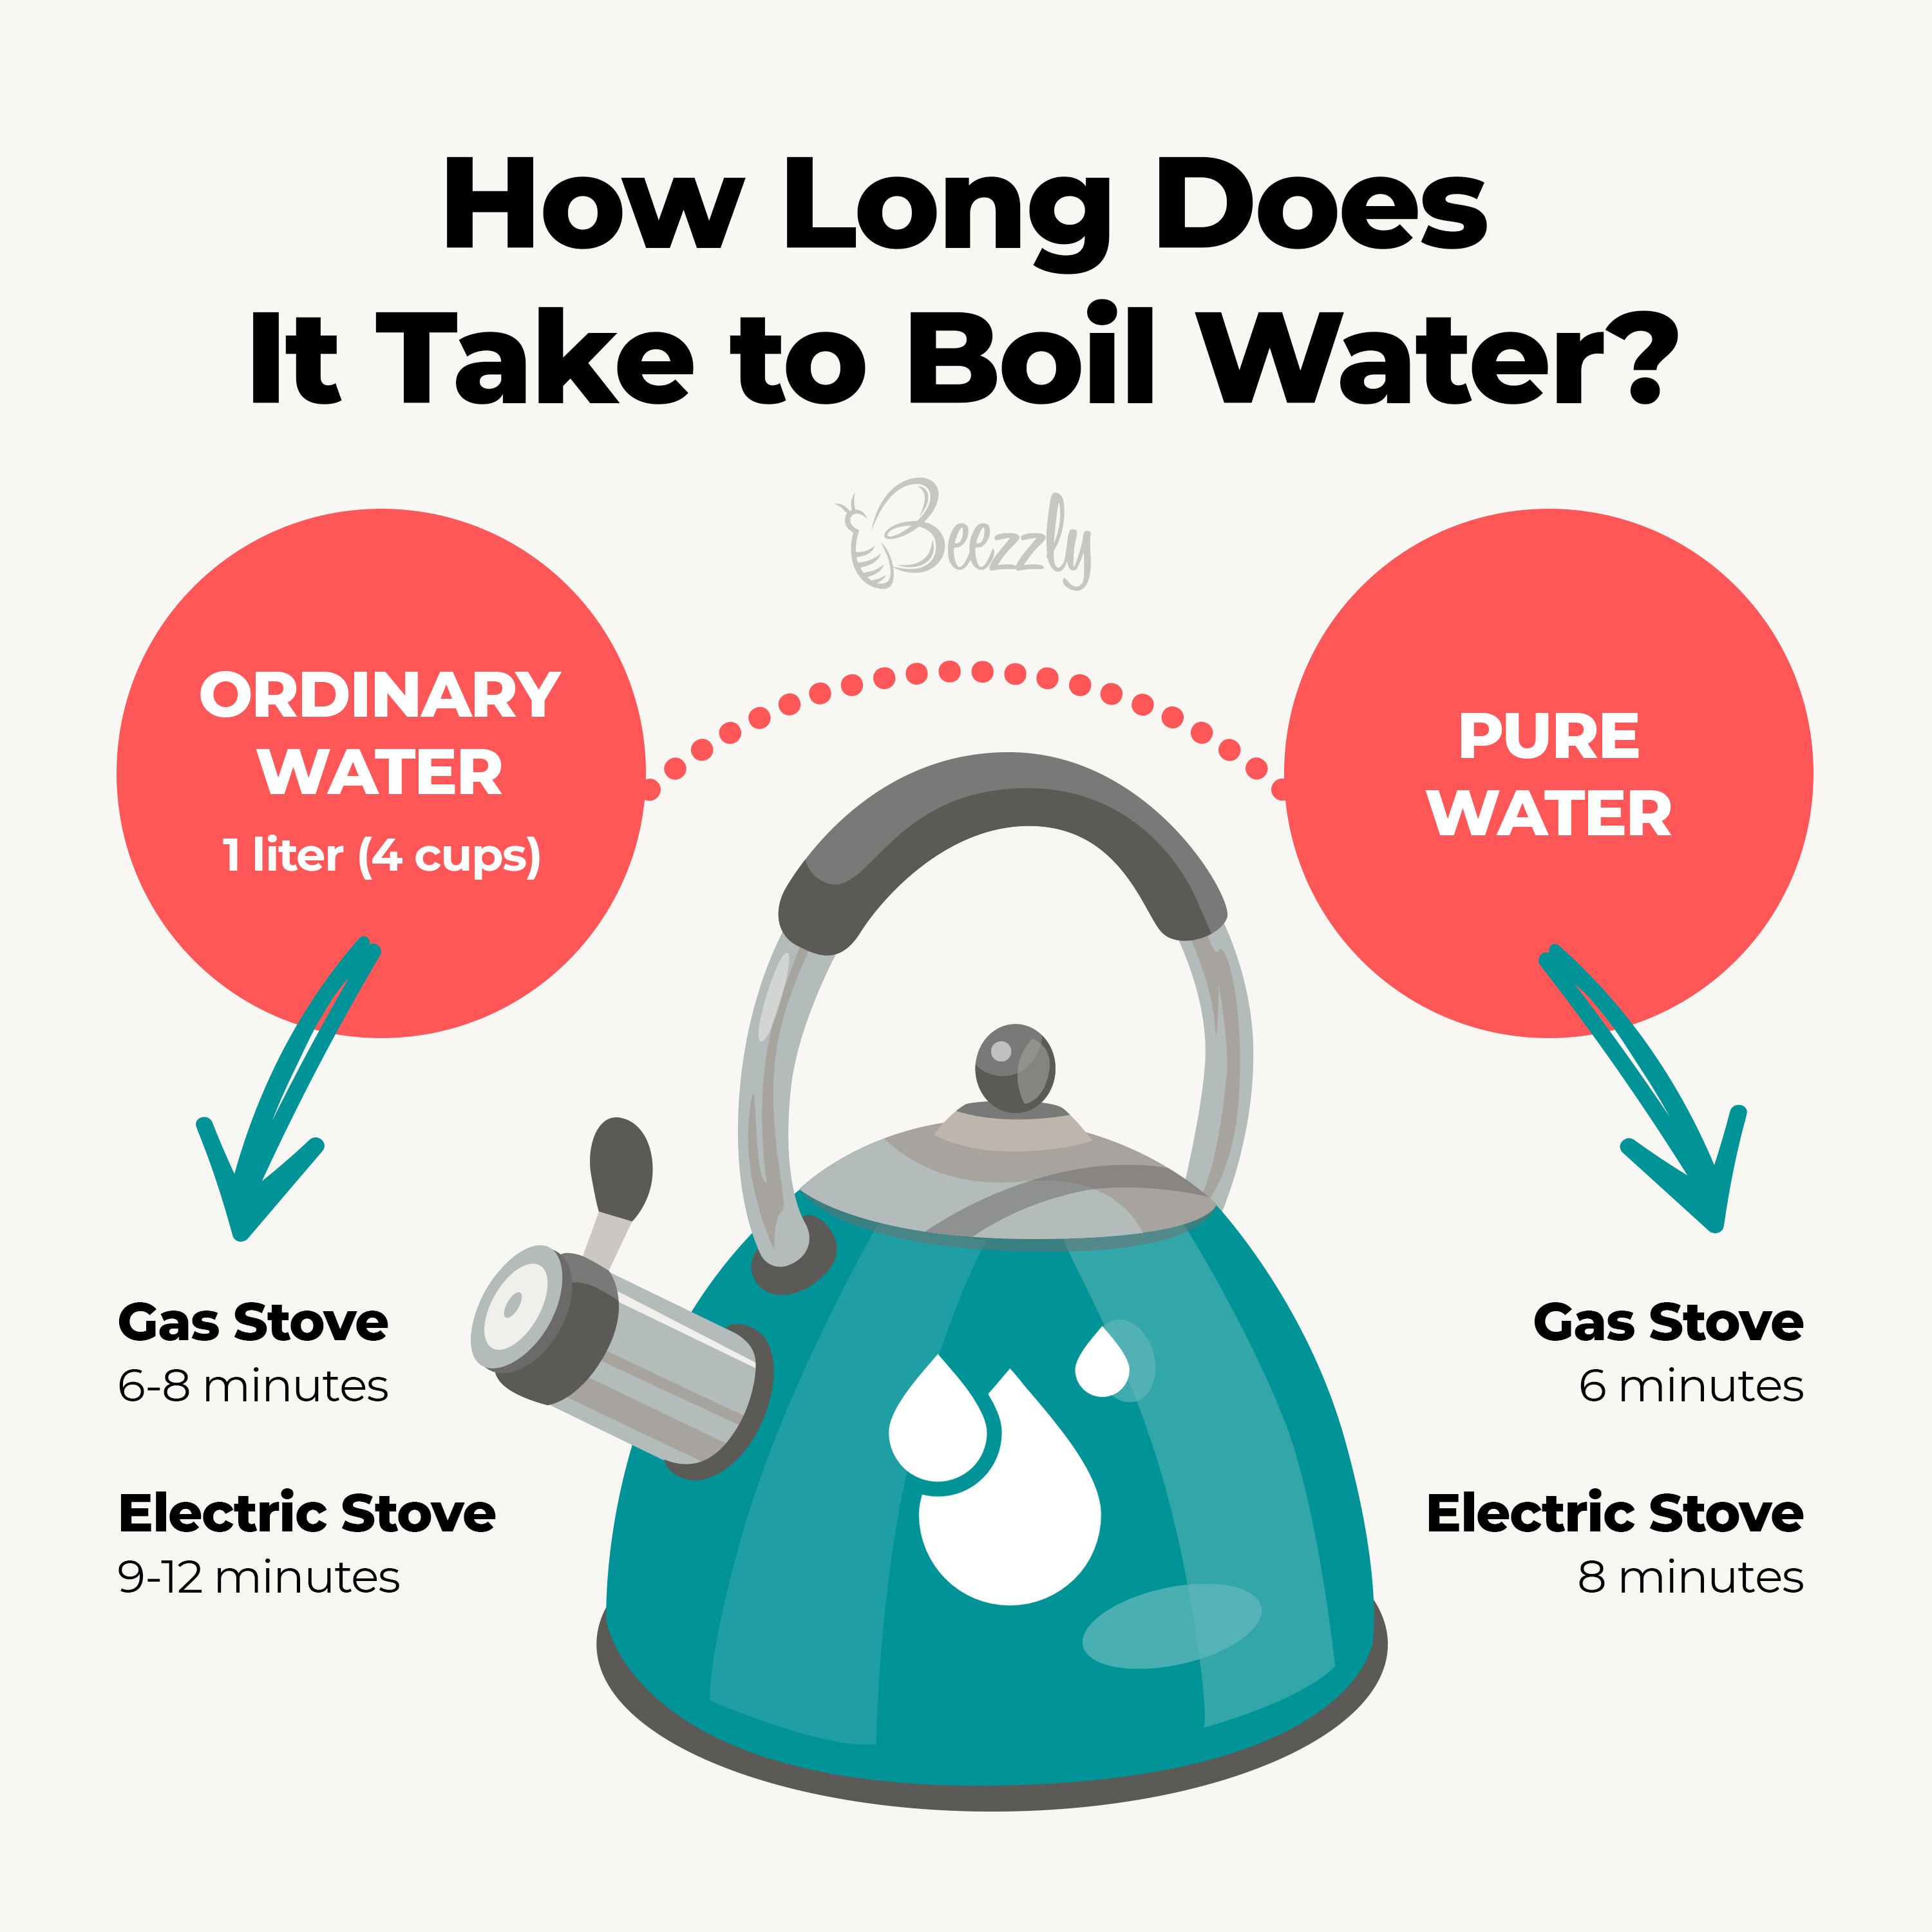 how long does it take to boil water